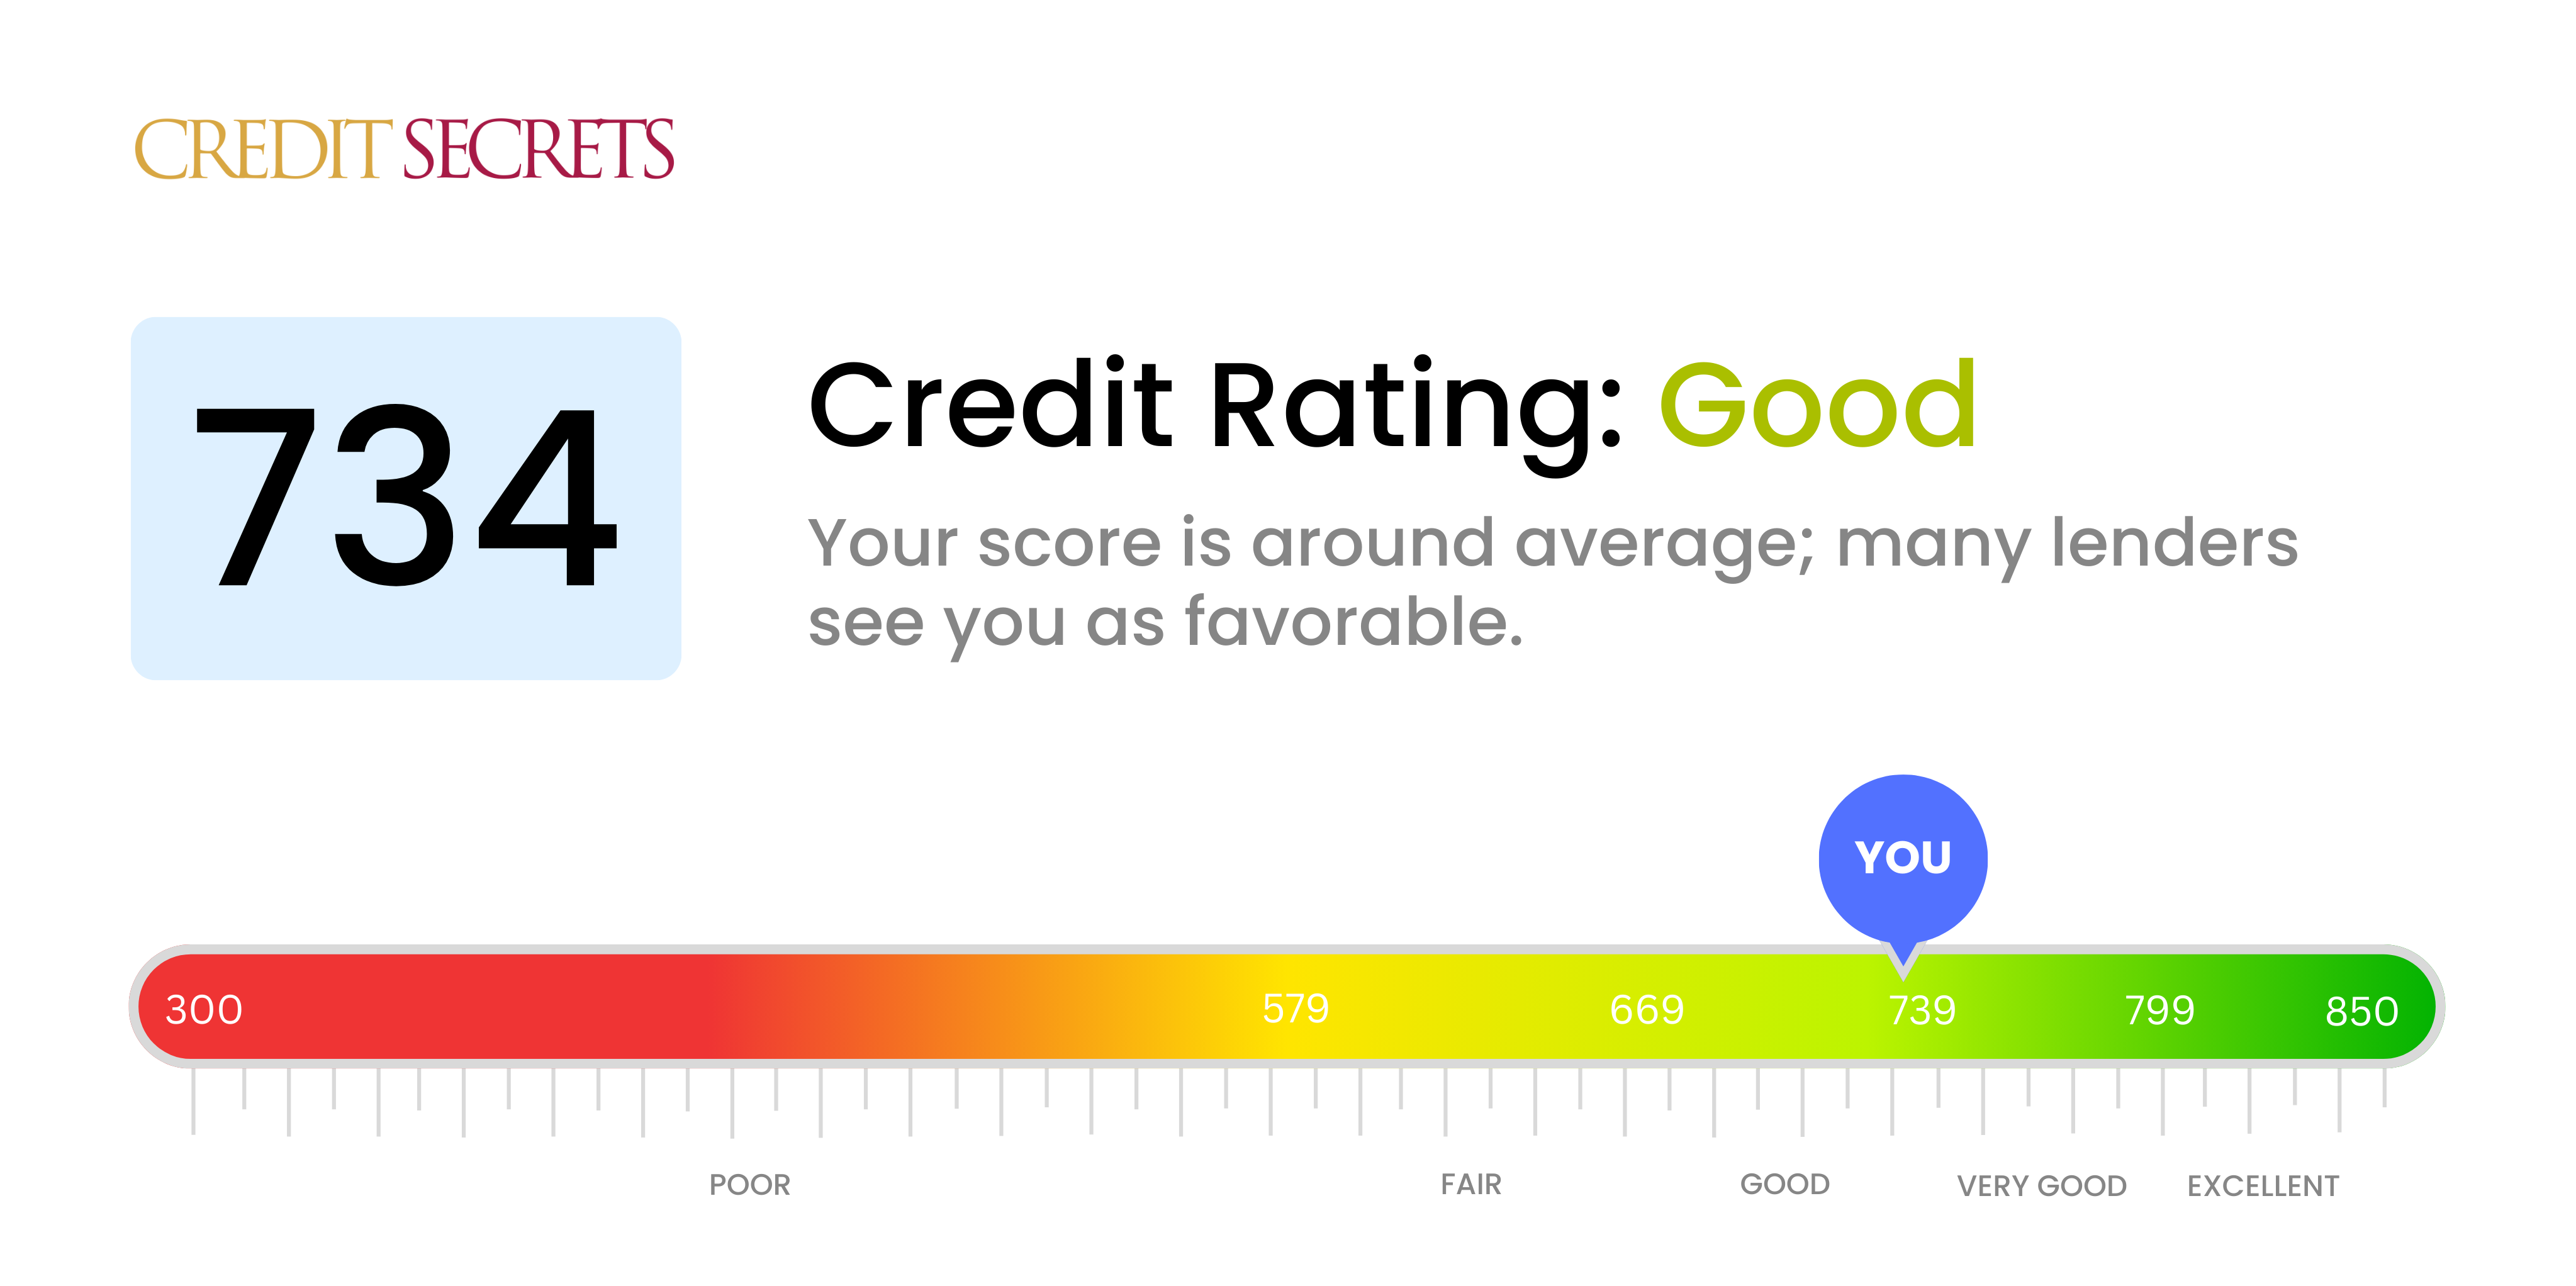 Is 734 a good credit score?